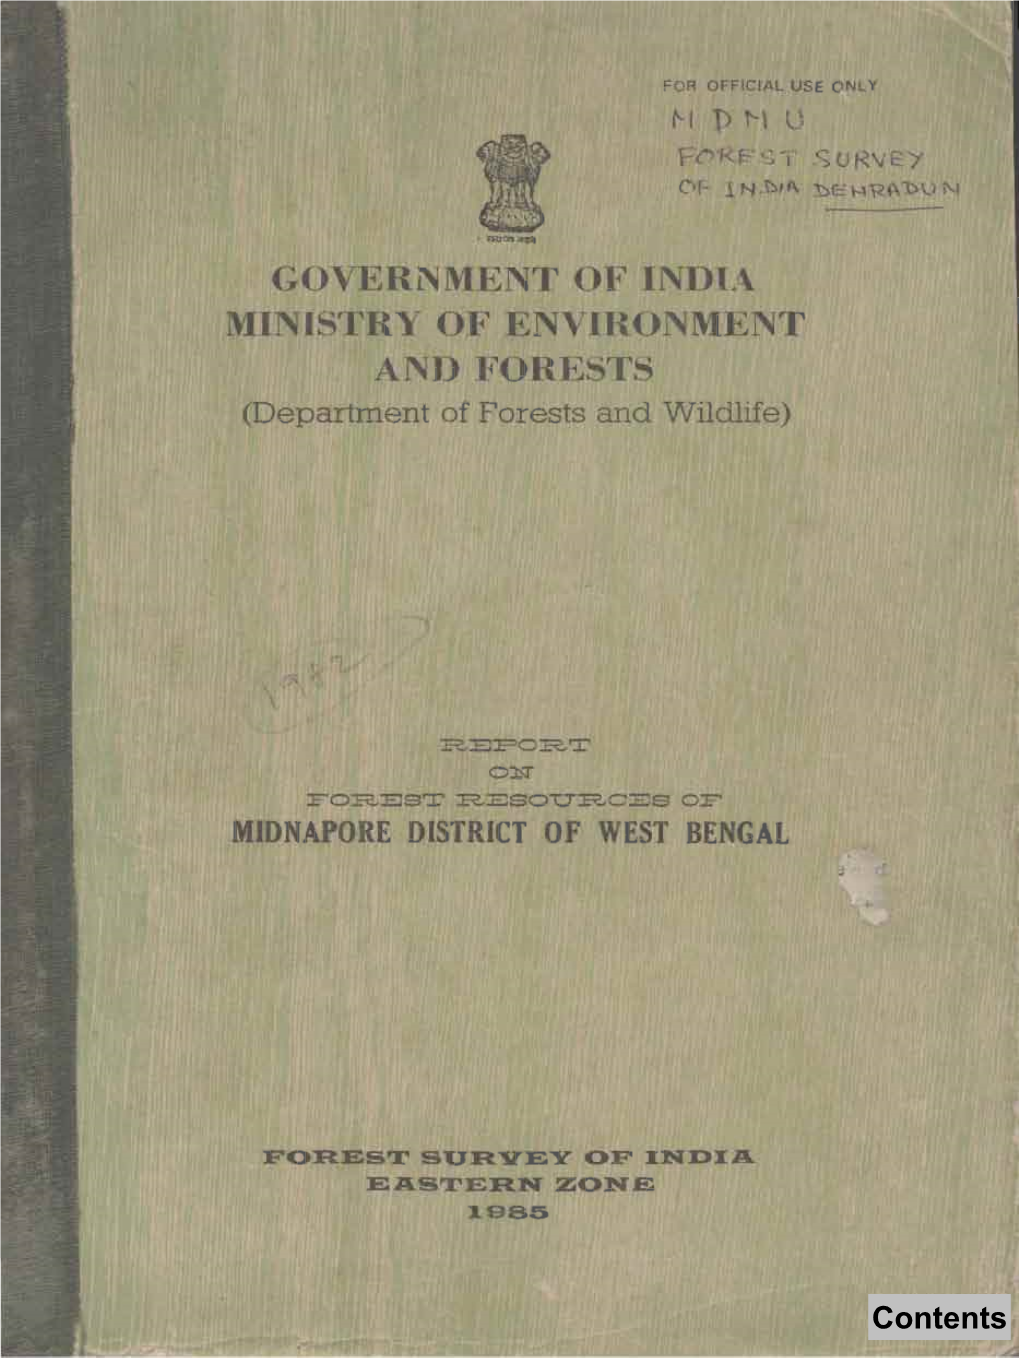 GOVERNMENT OJ? INDI4:\ MINISTRY of ENVII{ONMENT and FOR}1~STS (Department of Forests and Wildlife)